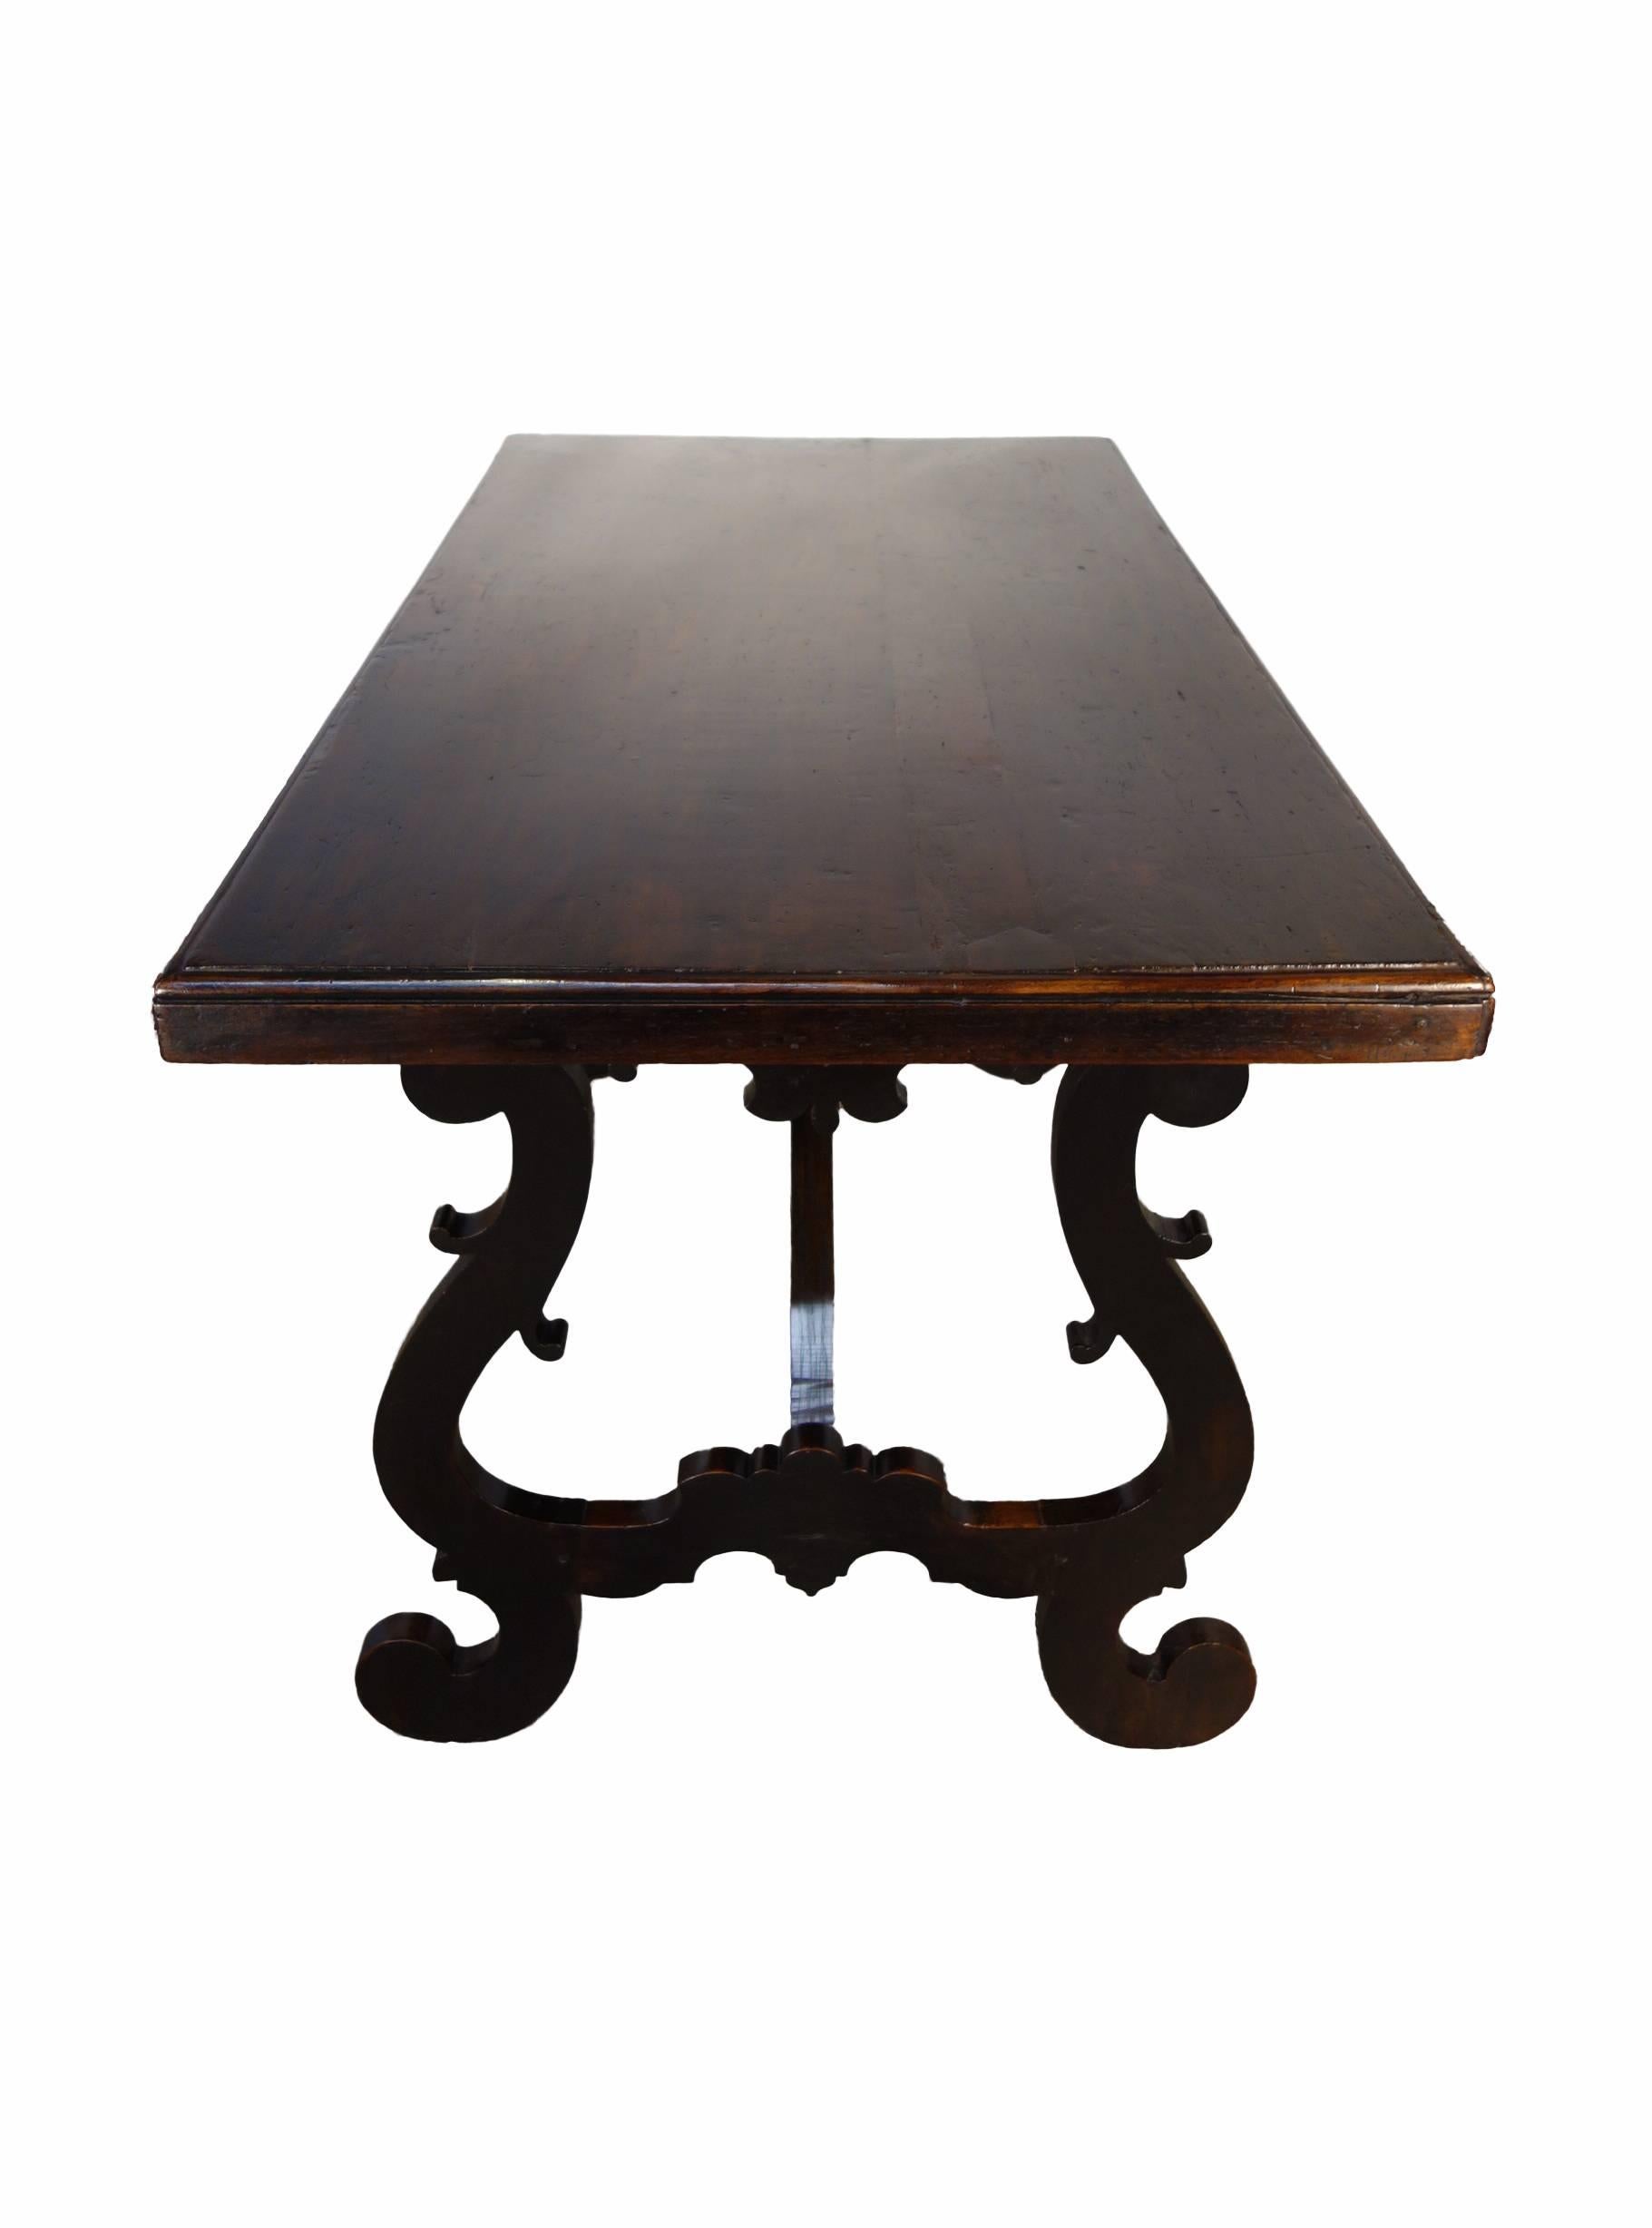 Renaissance 17th Century Tuscan Refectory Style Walnut Table with Lyre Legs